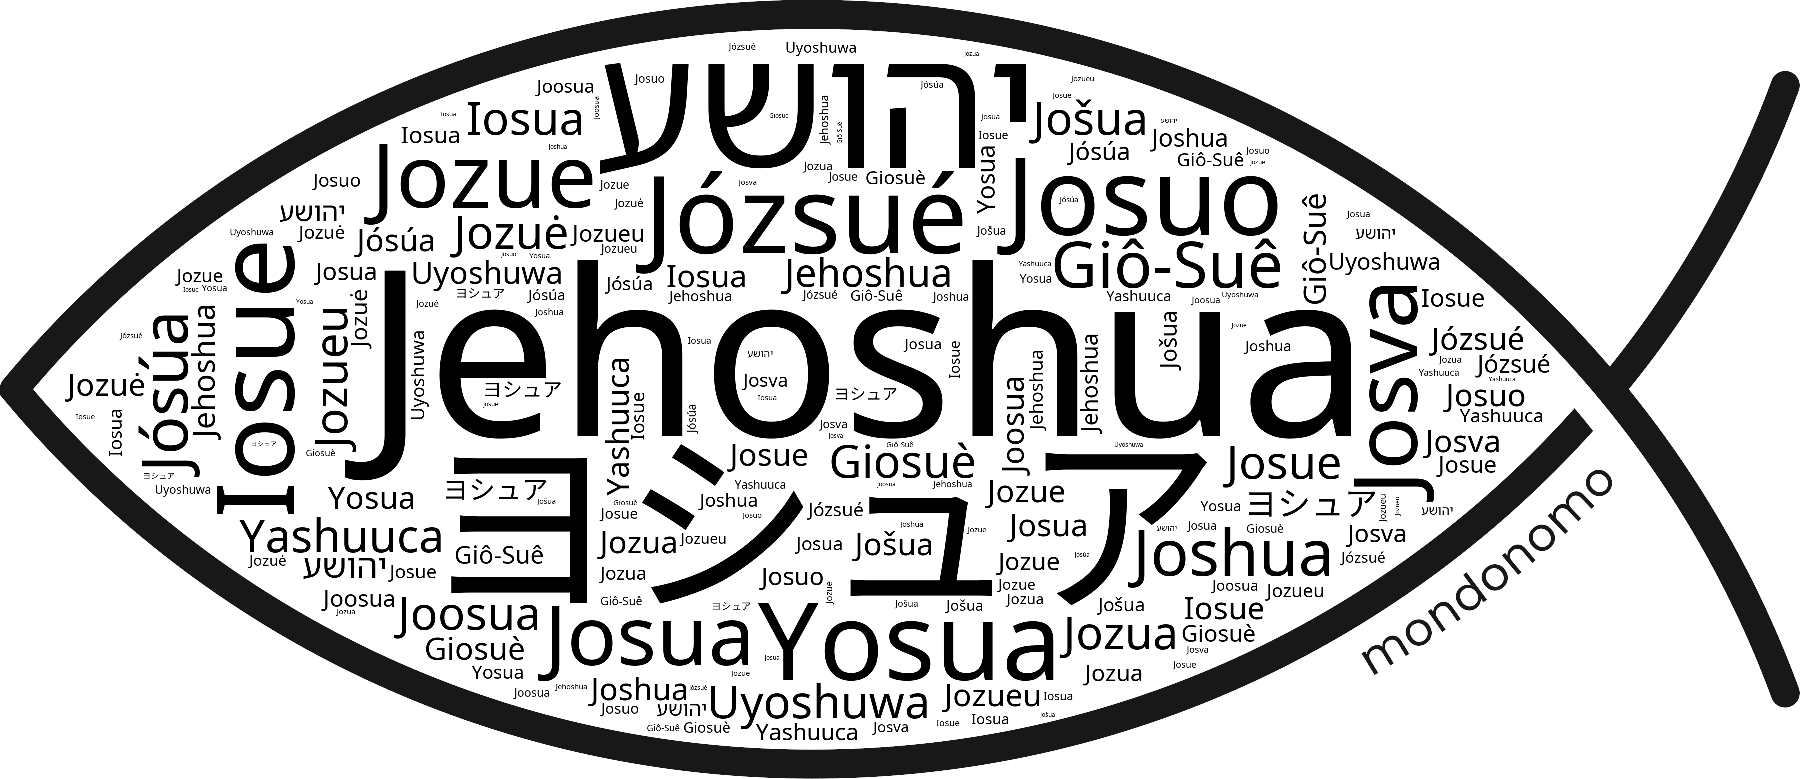 Name Jehoshua in the world's Bibles